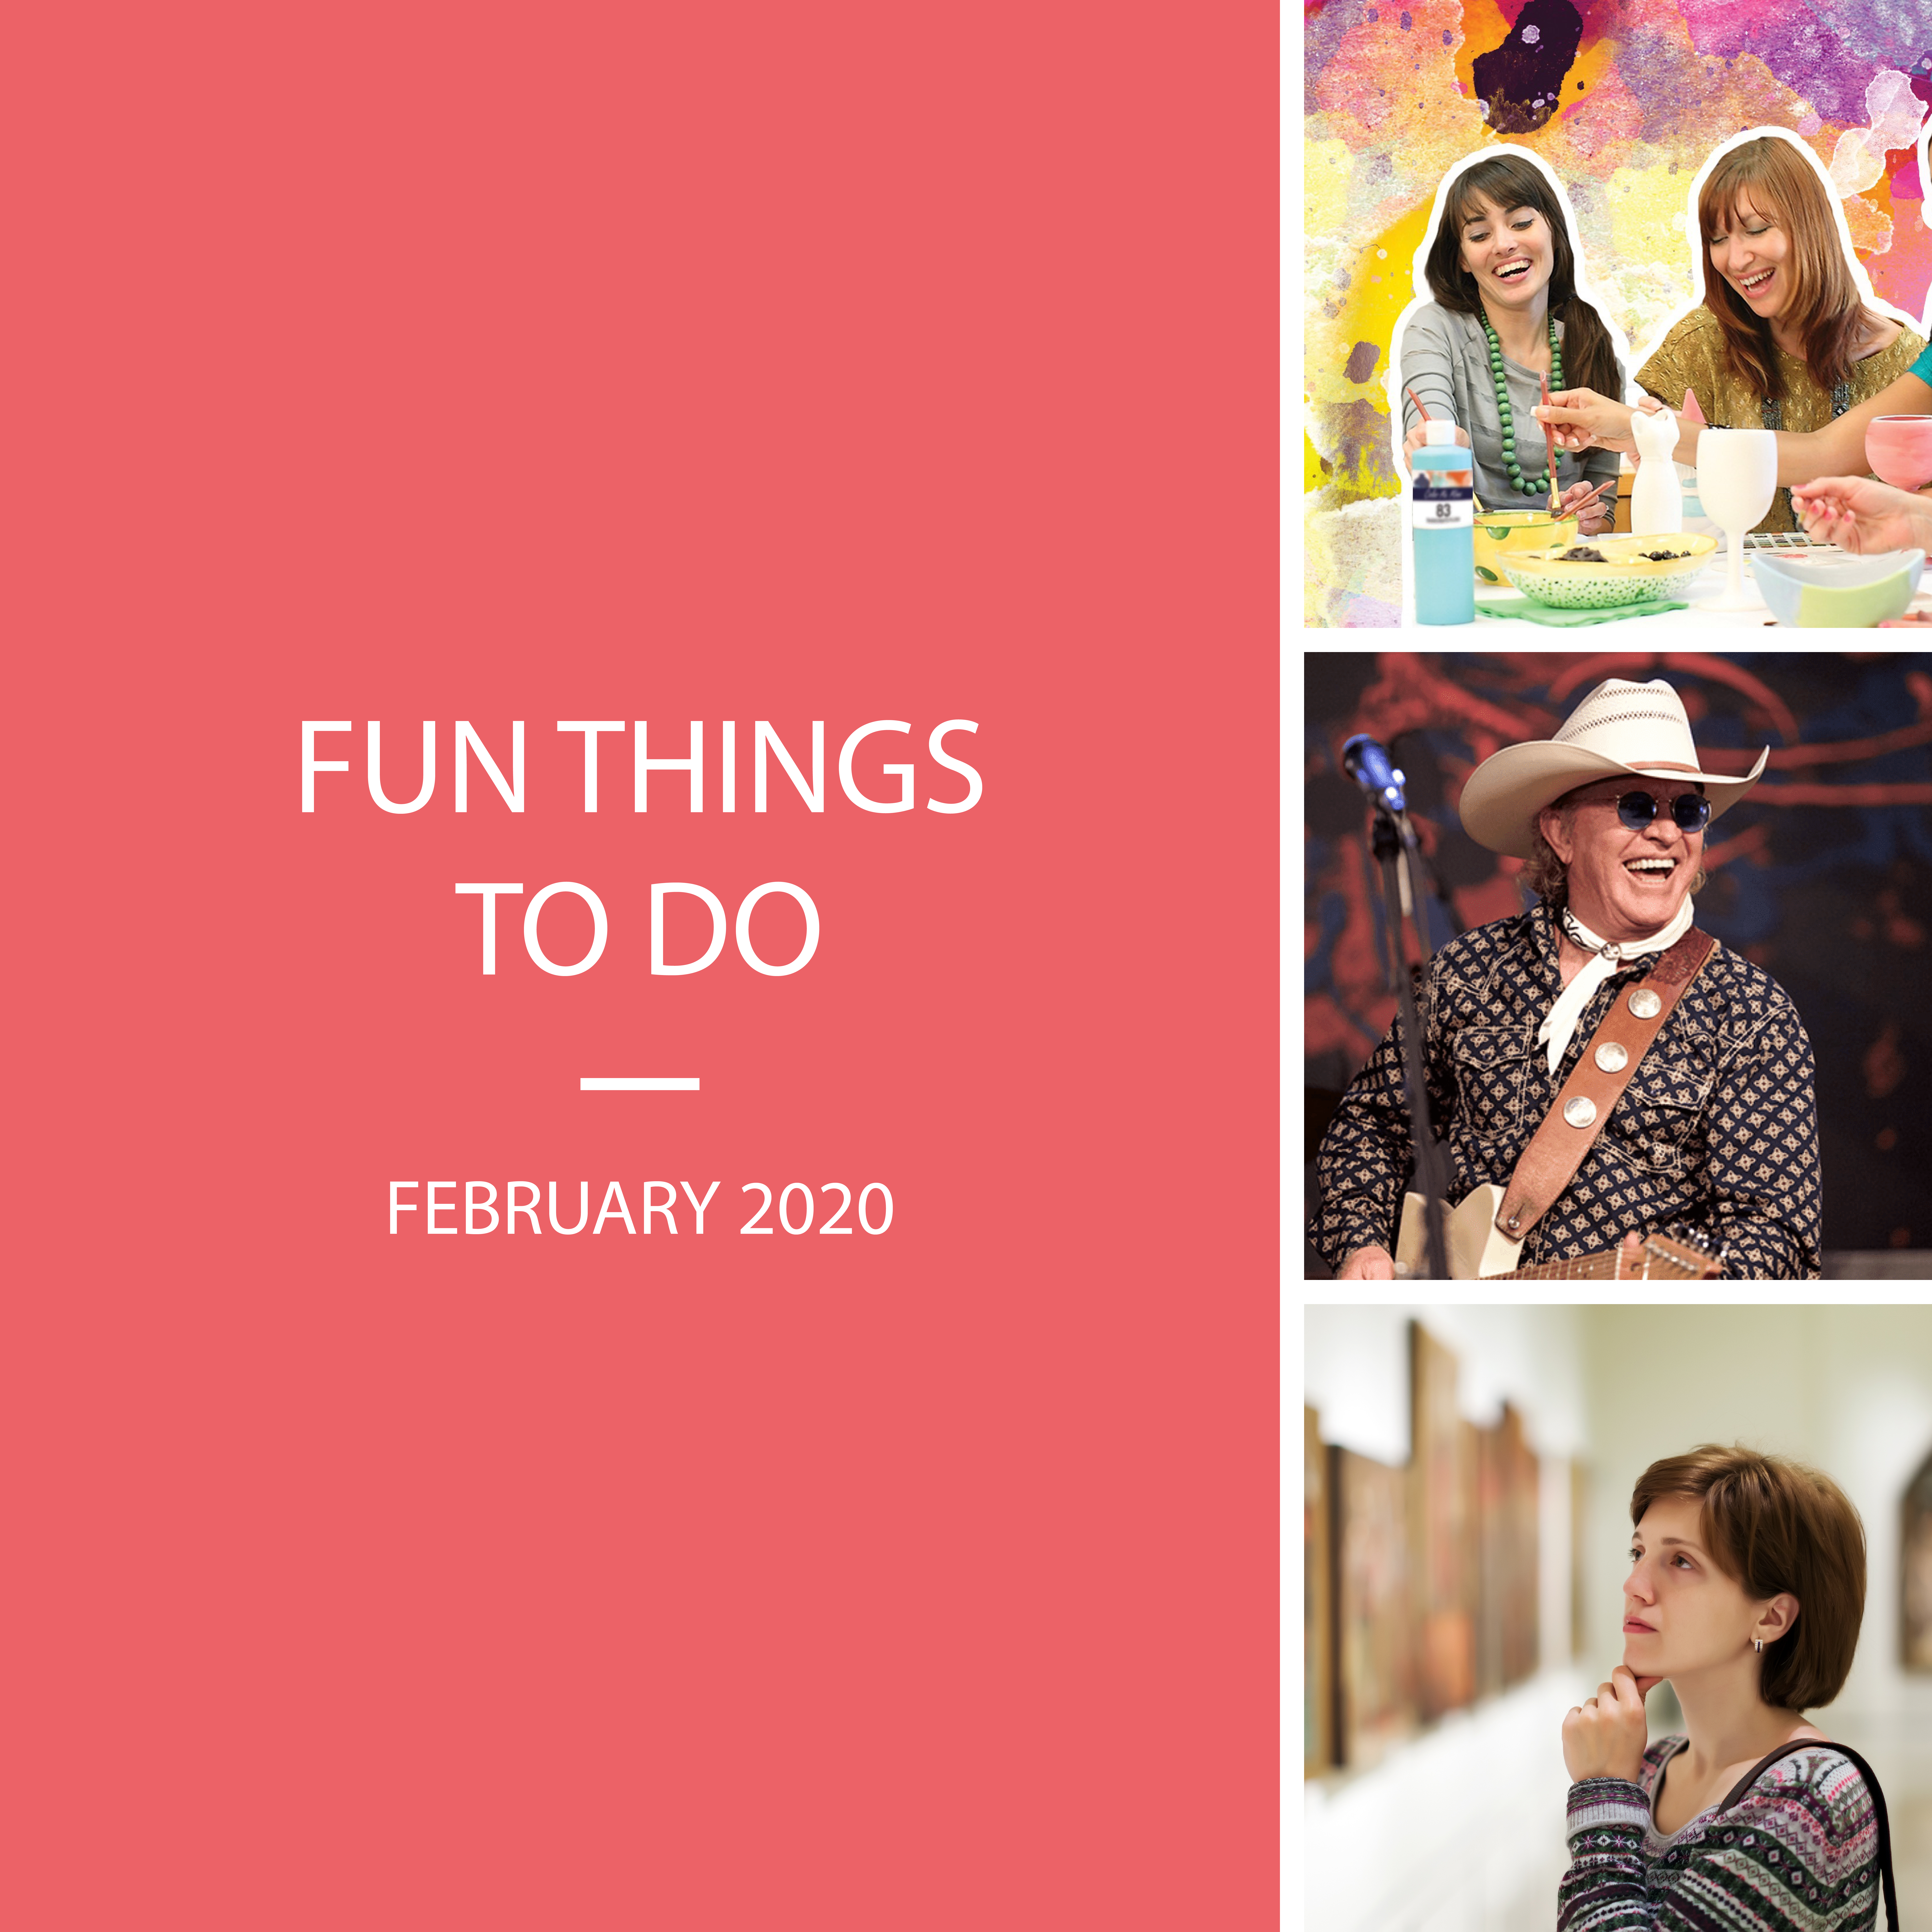 Fall in Love with Fun Things to Do in February